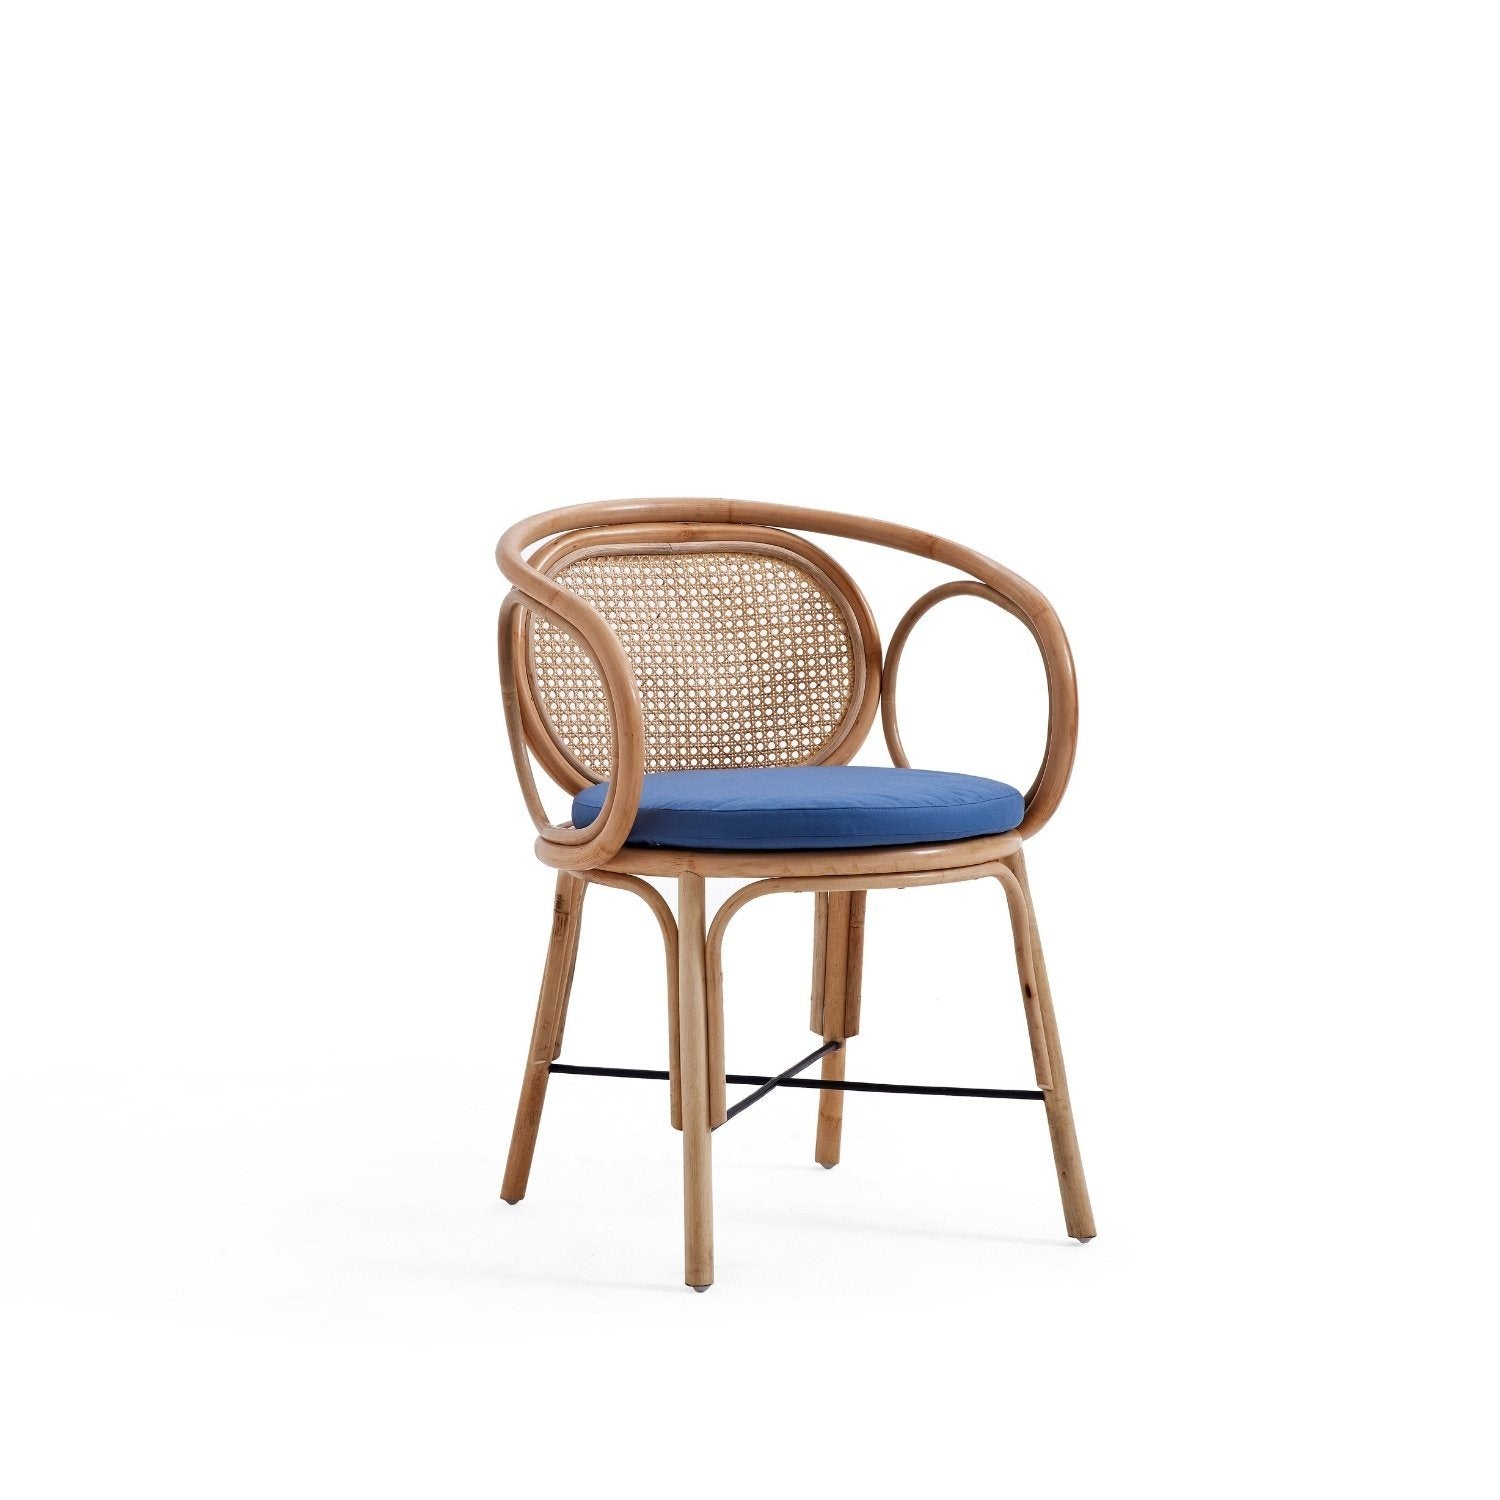 Cane Chair - Valyou 